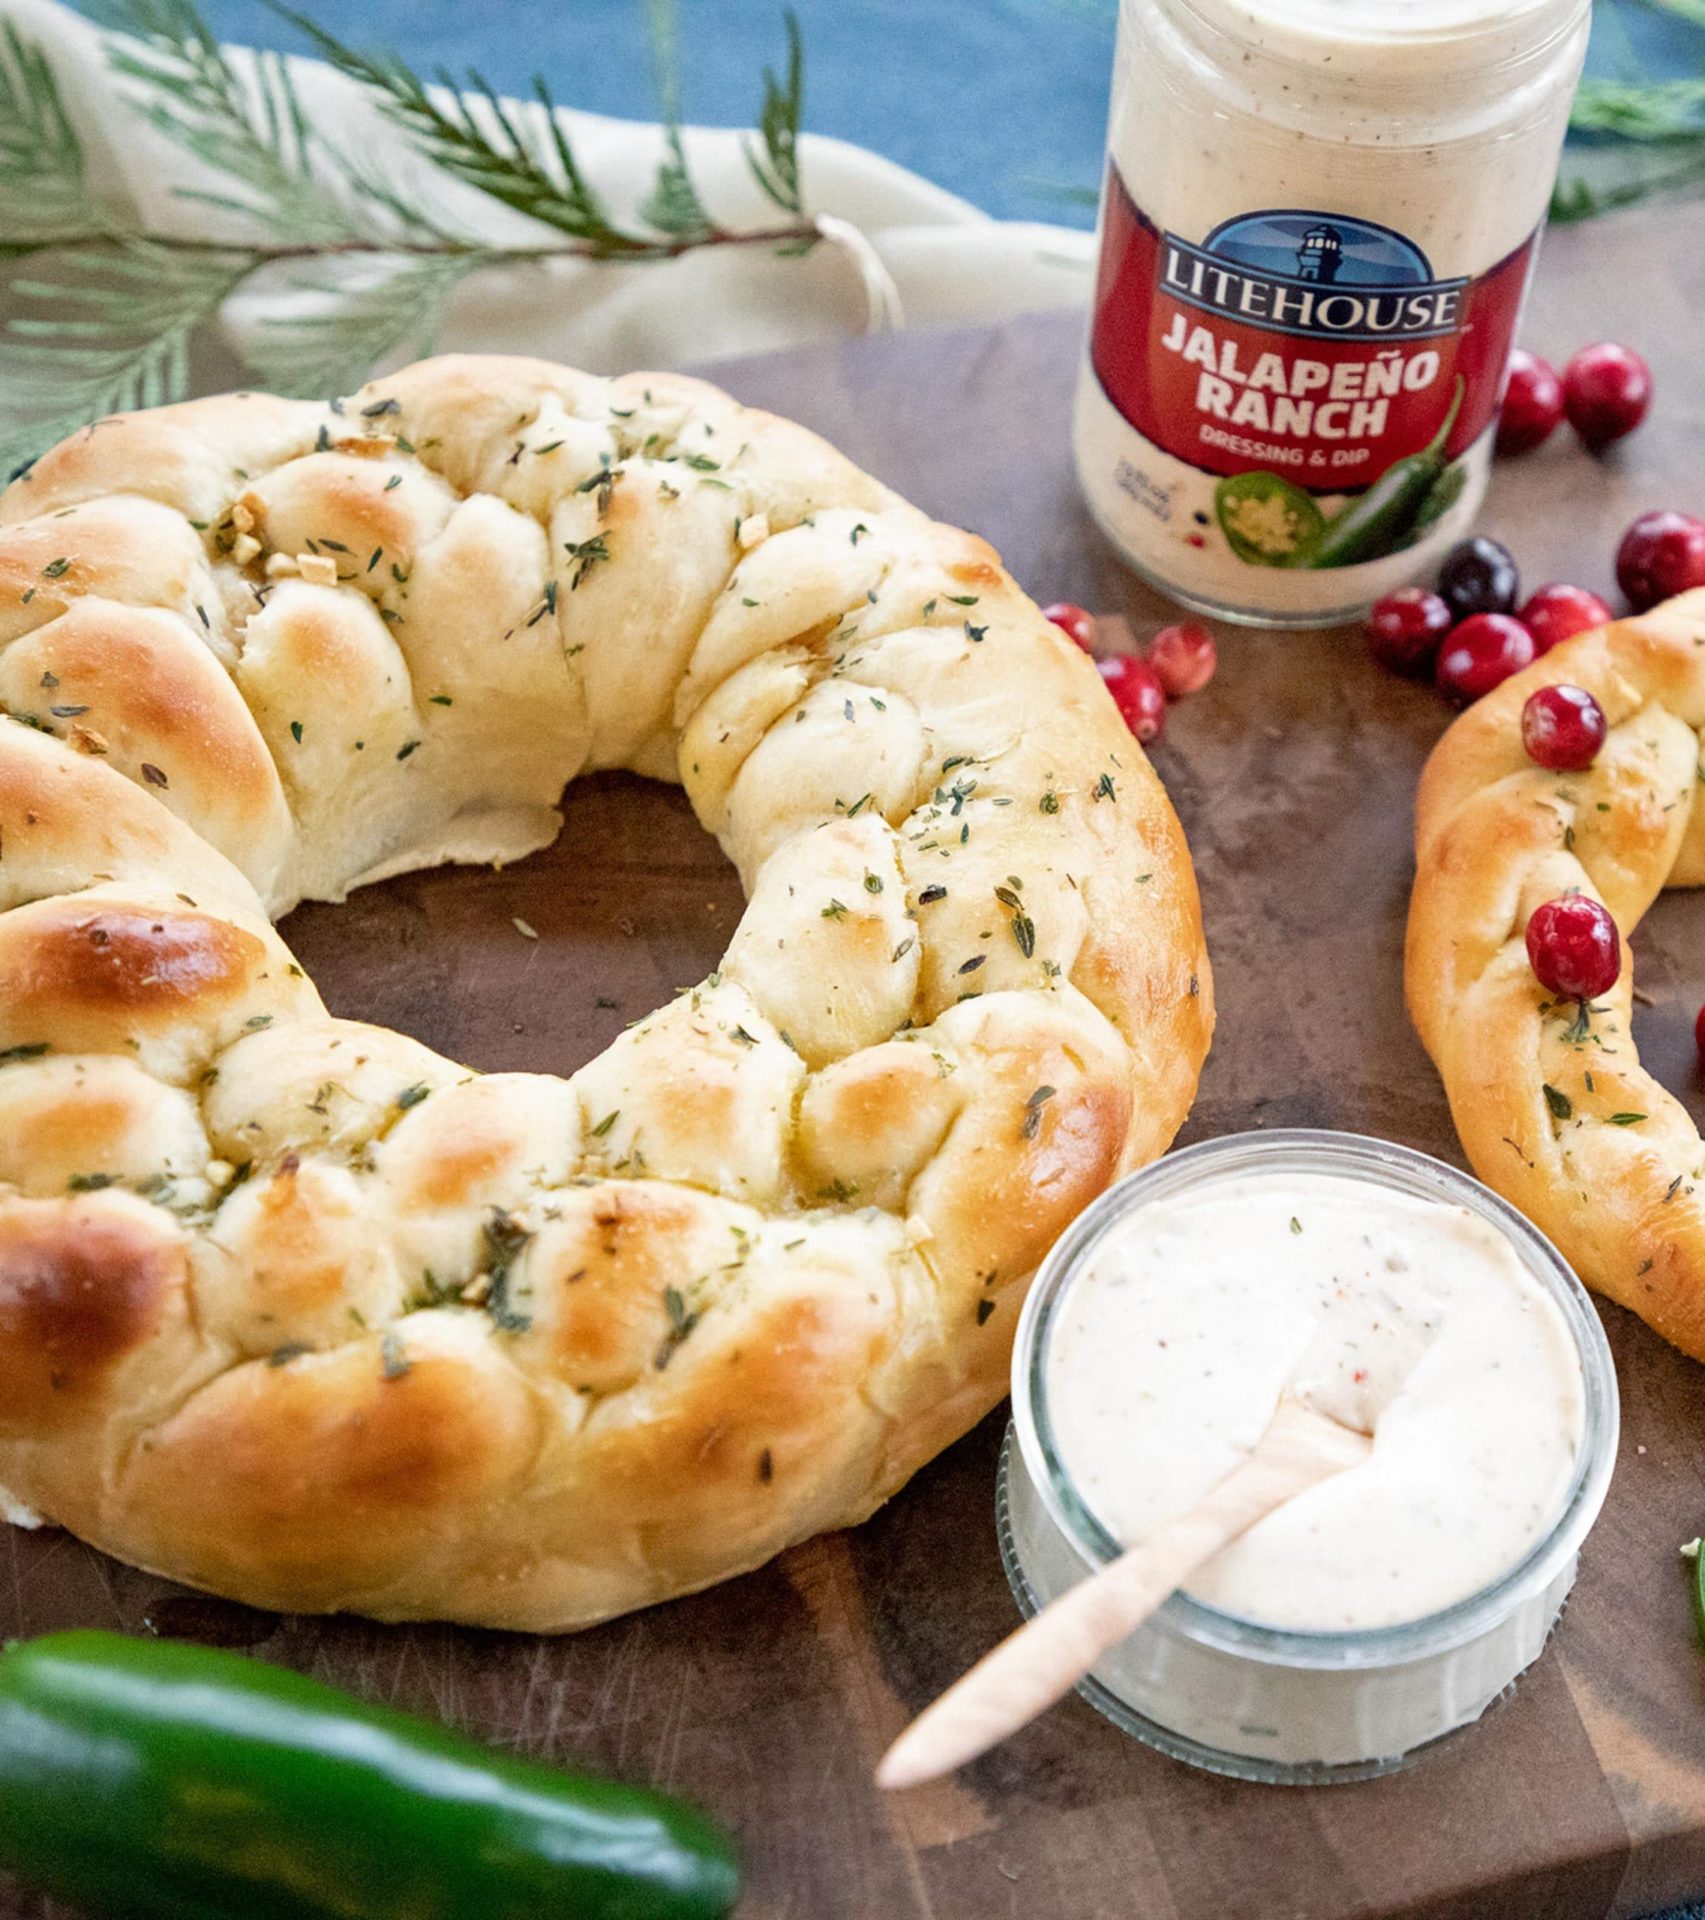 BREAD WREATH WITH JALAPENO RANCH & BLUE CHEESE DIPS